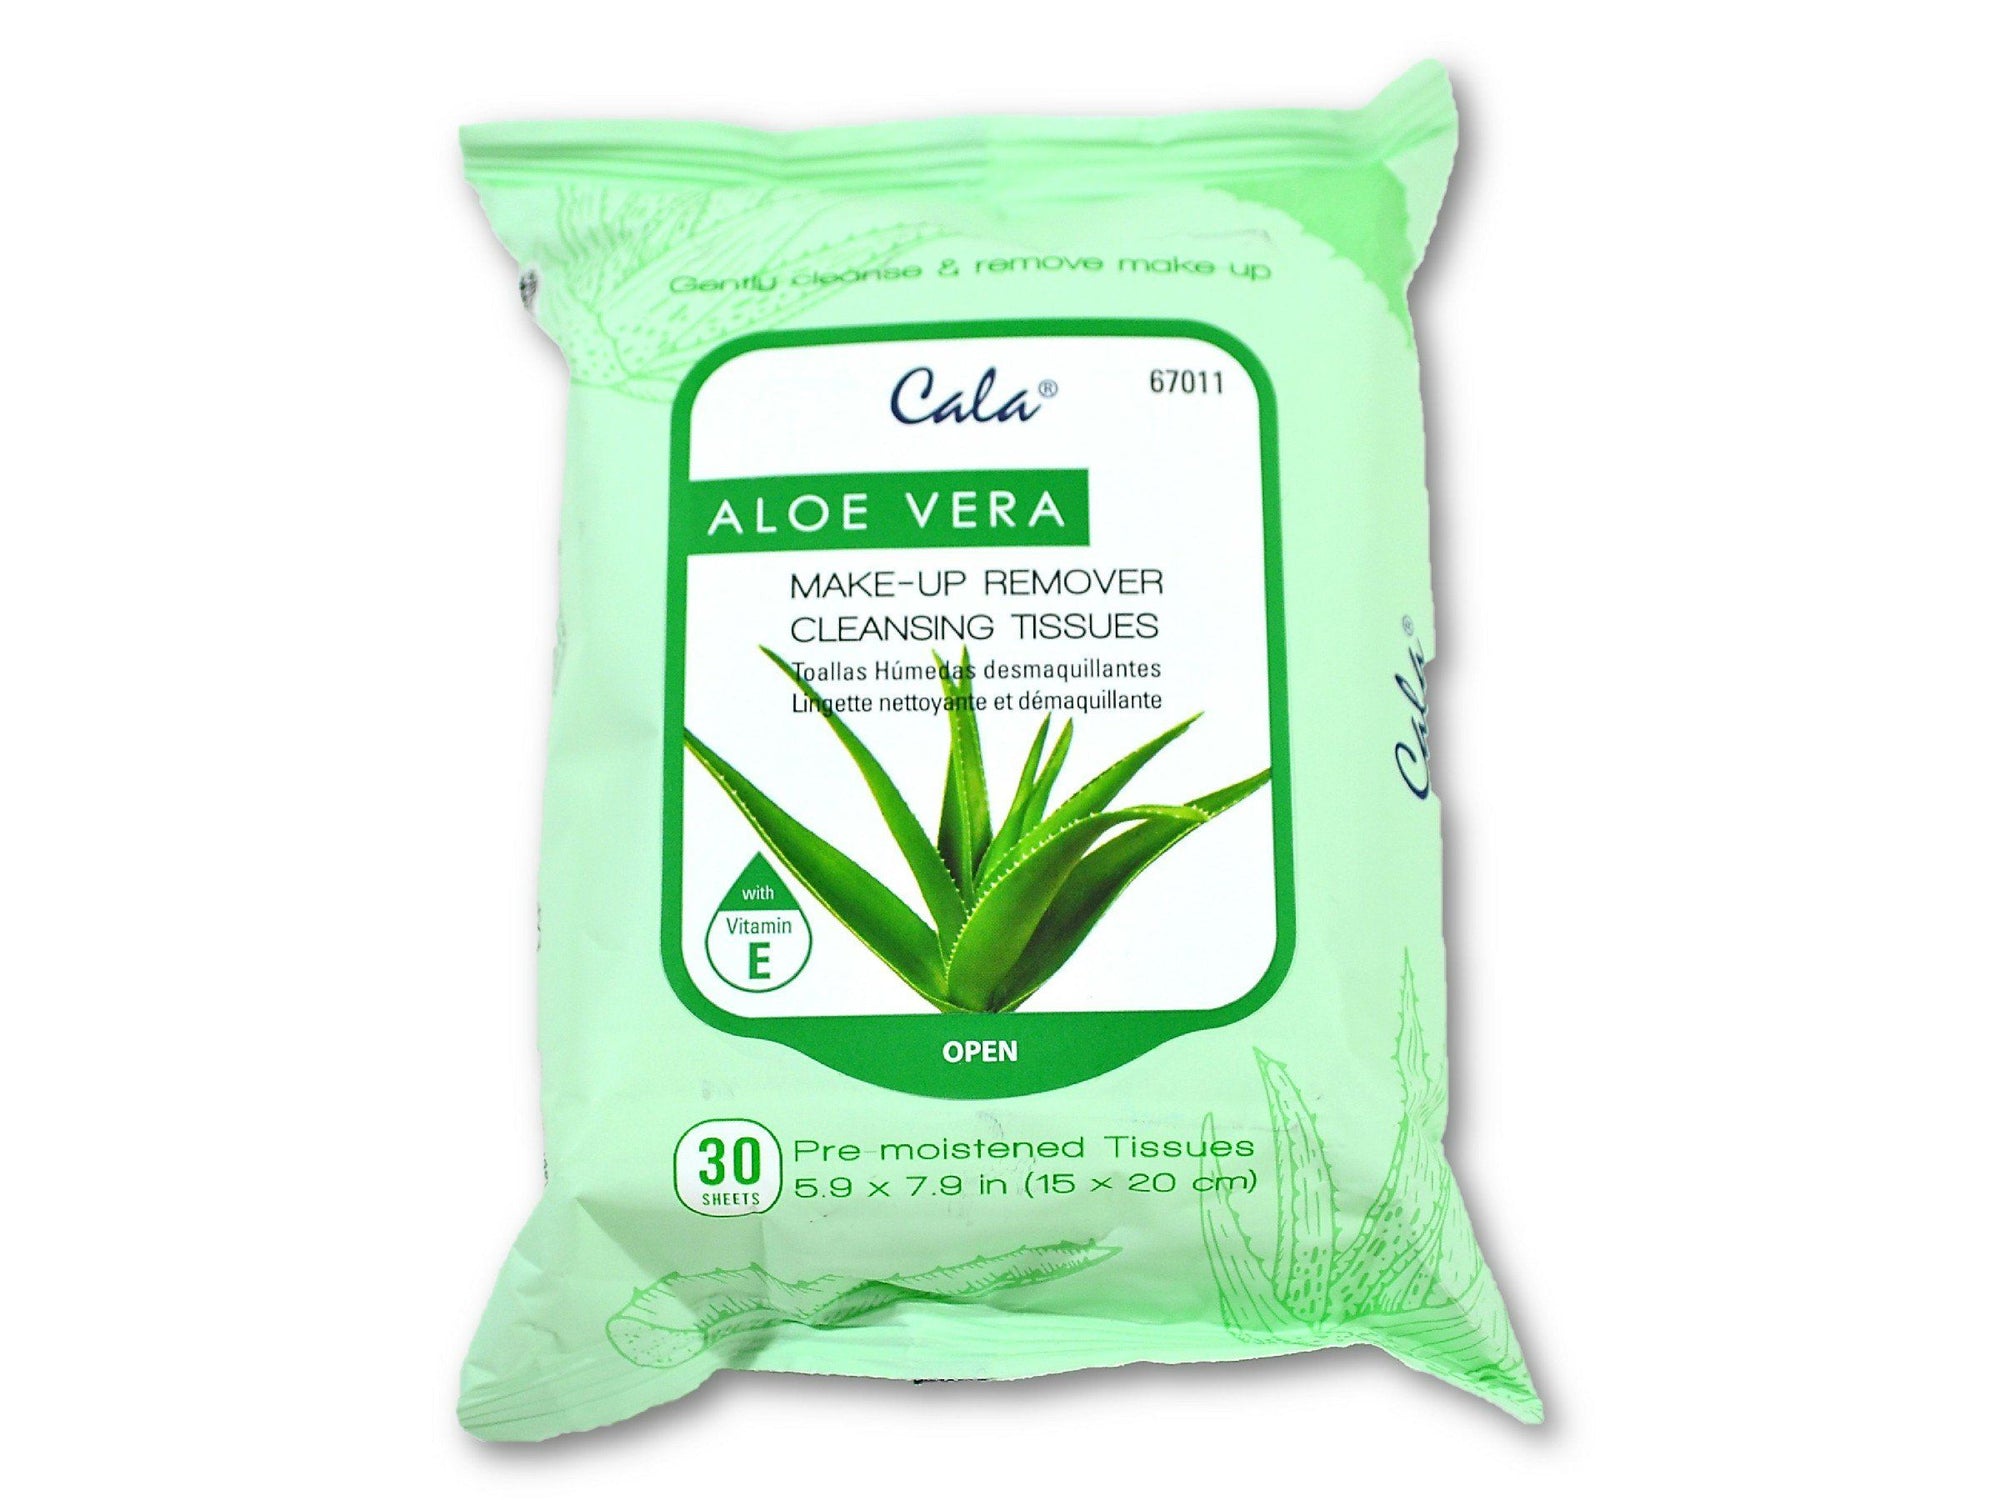 Cala Aloe Vera Makeup Remover Cleansing Tissues #67011 (6PC)